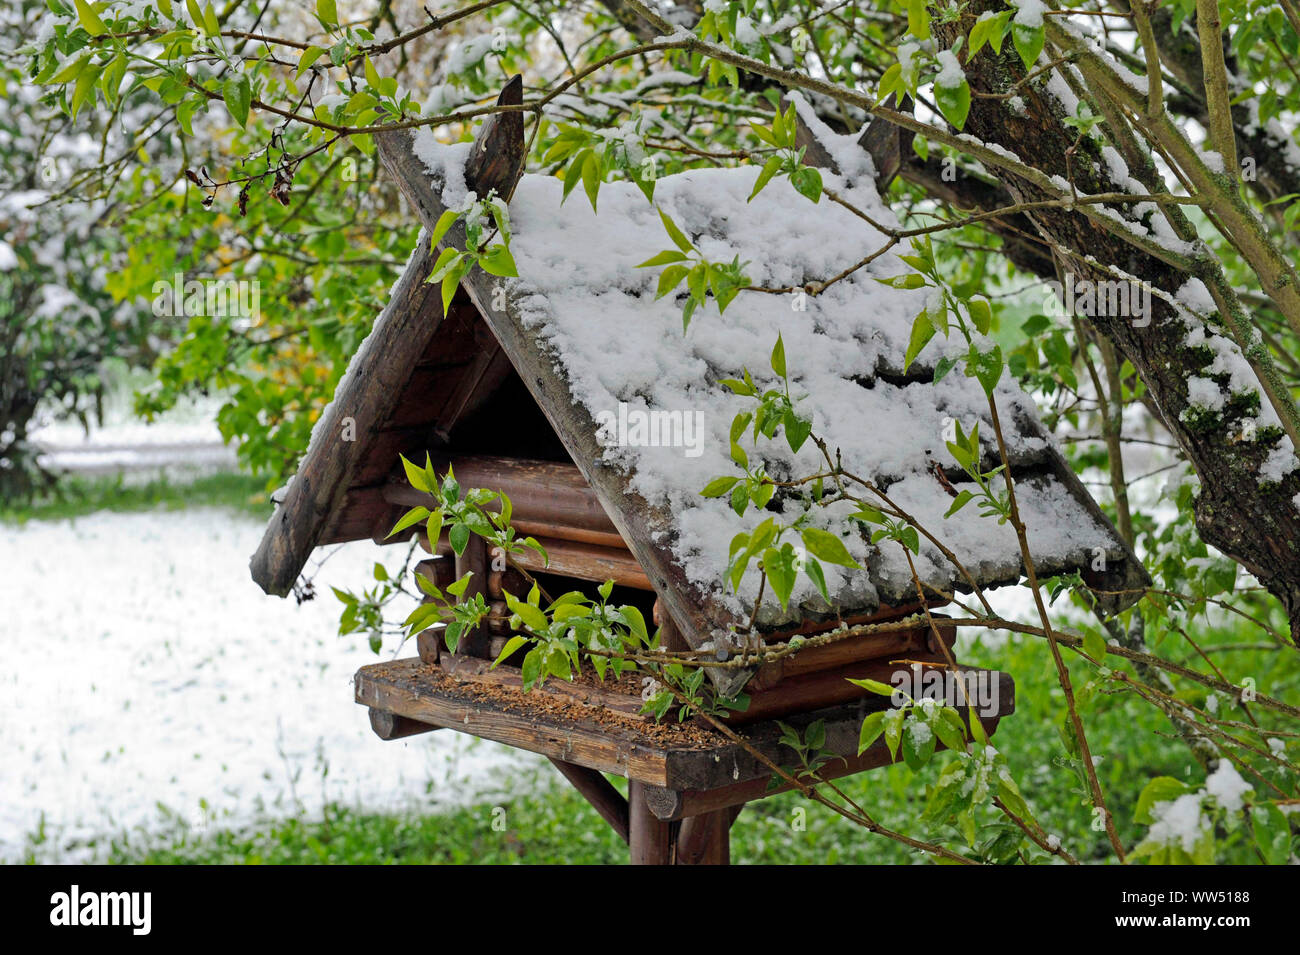 Fresh snowfall in postwinter covering the lilac shrub and the birdhouse in spring garden Stock Photo